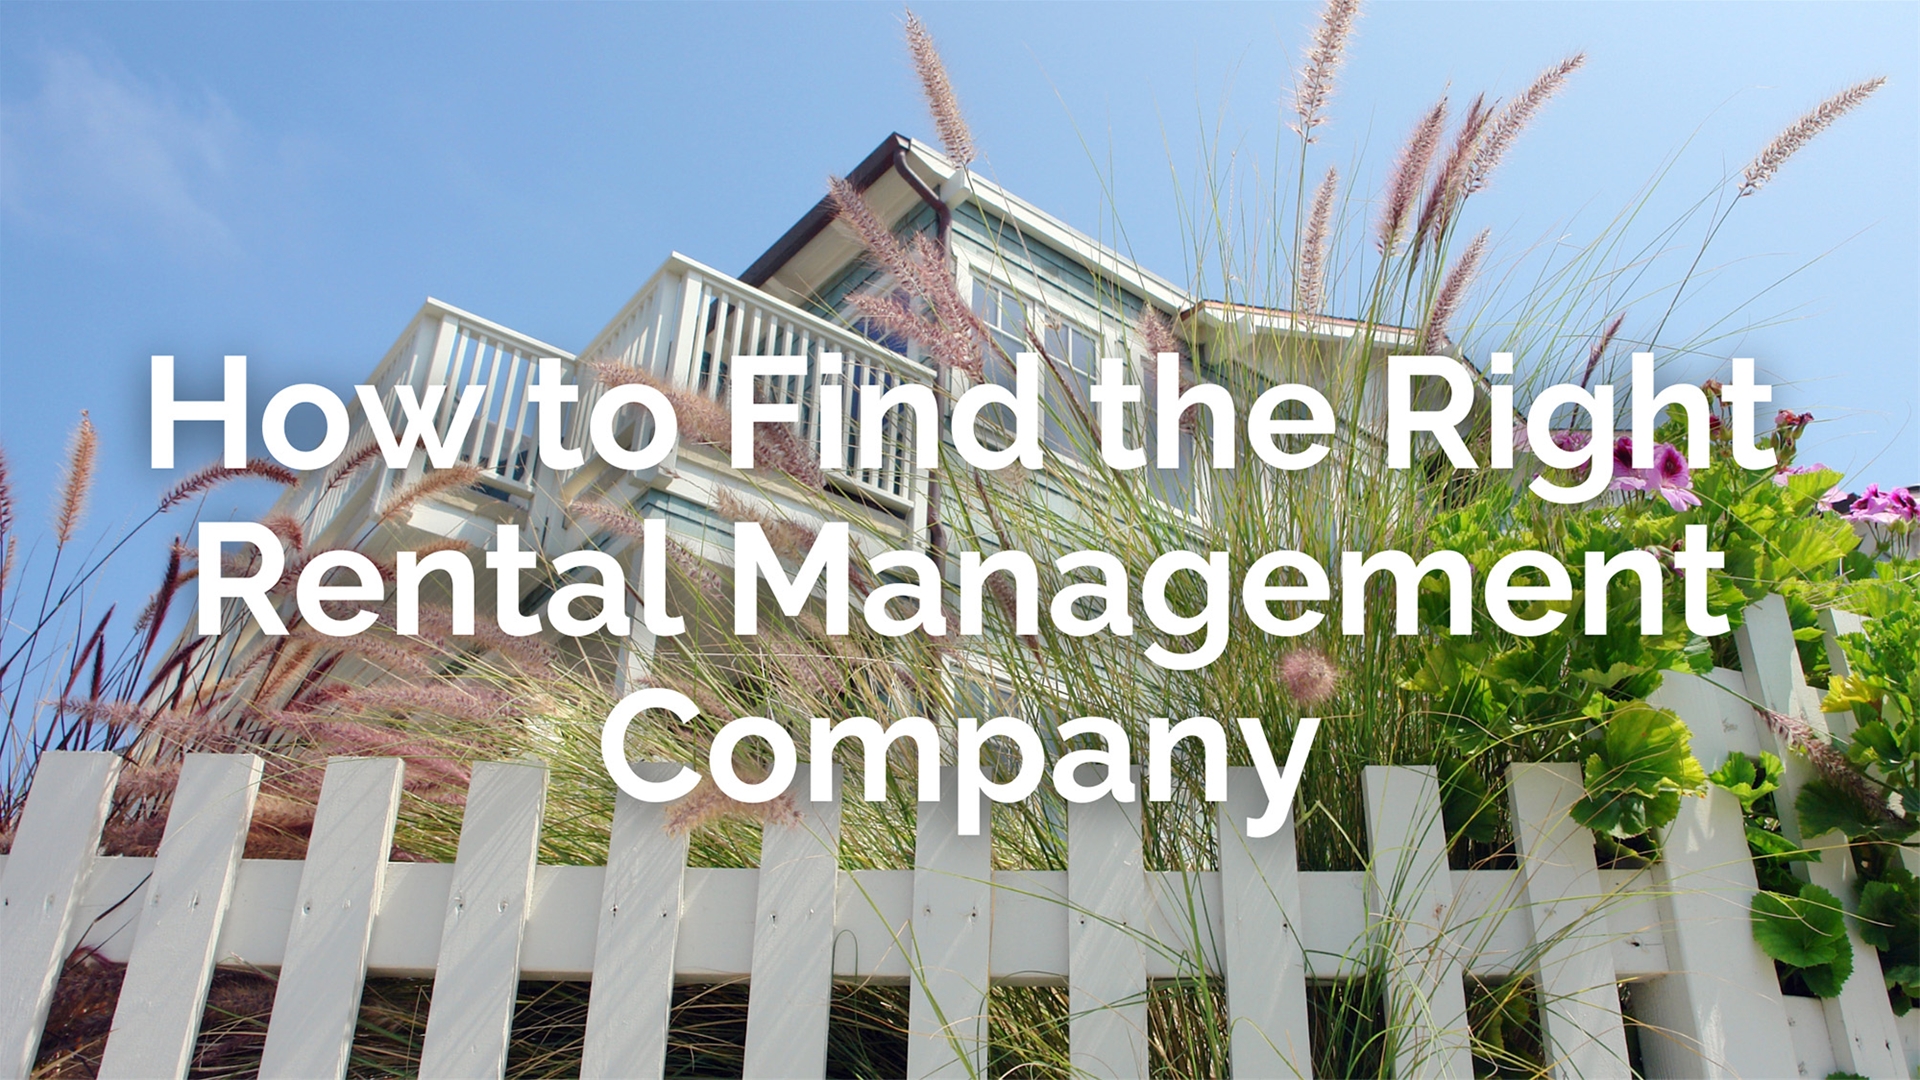 Vacation rental management is not easy! Find out how to find the right rental management company for your Cape Cod summer home with Nauset Rental